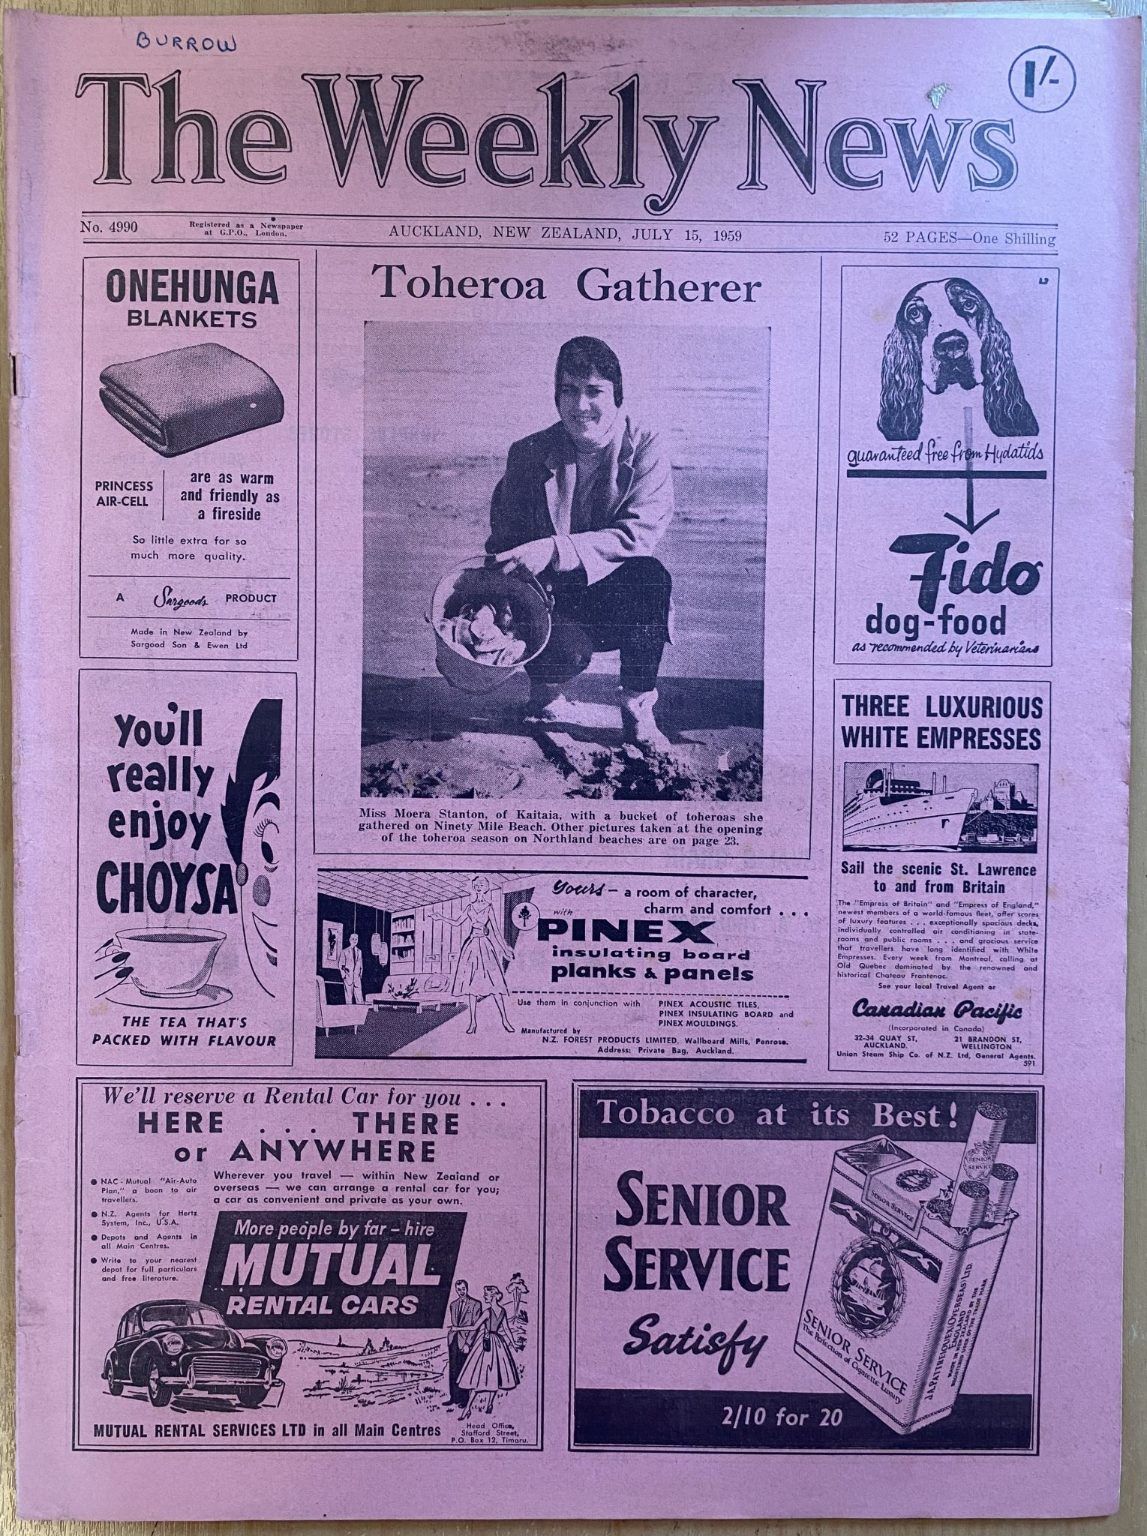 OLD NEWSPAPER: The Weekly News - No. 4990, 15 July 1959